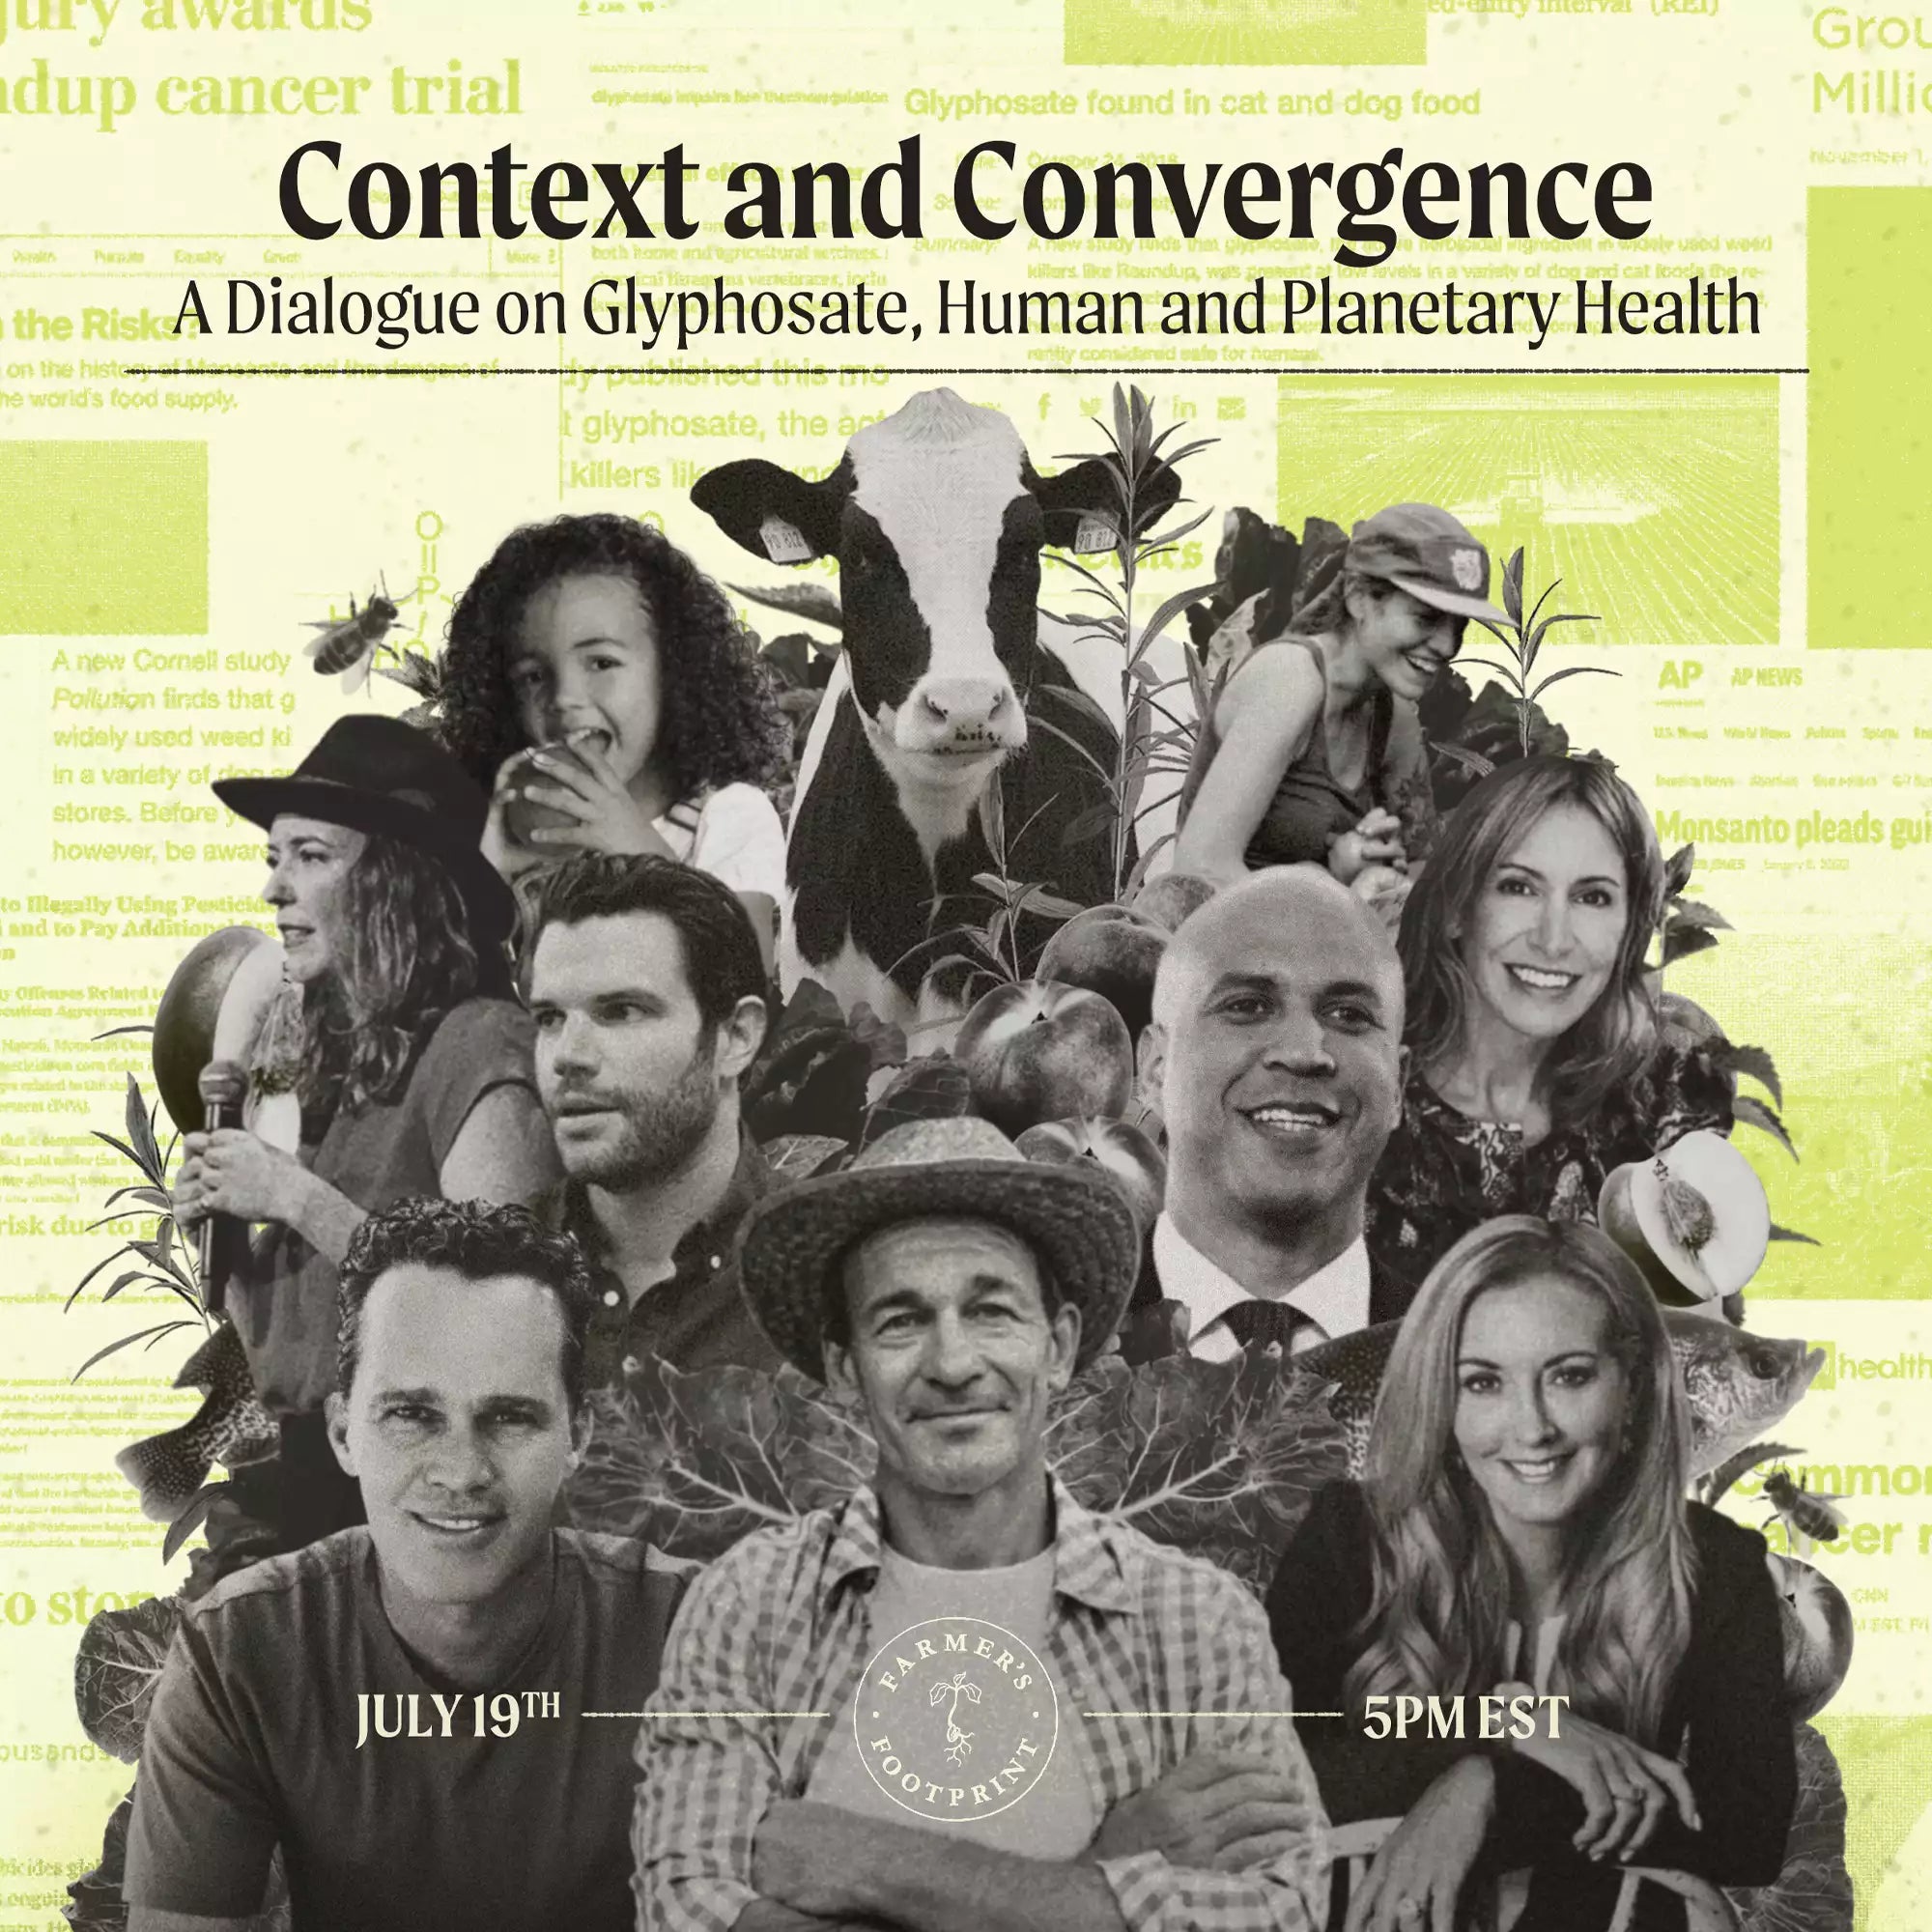 Context and Convergence: A Dialogue on Glyphosate, Human and Planetary Health